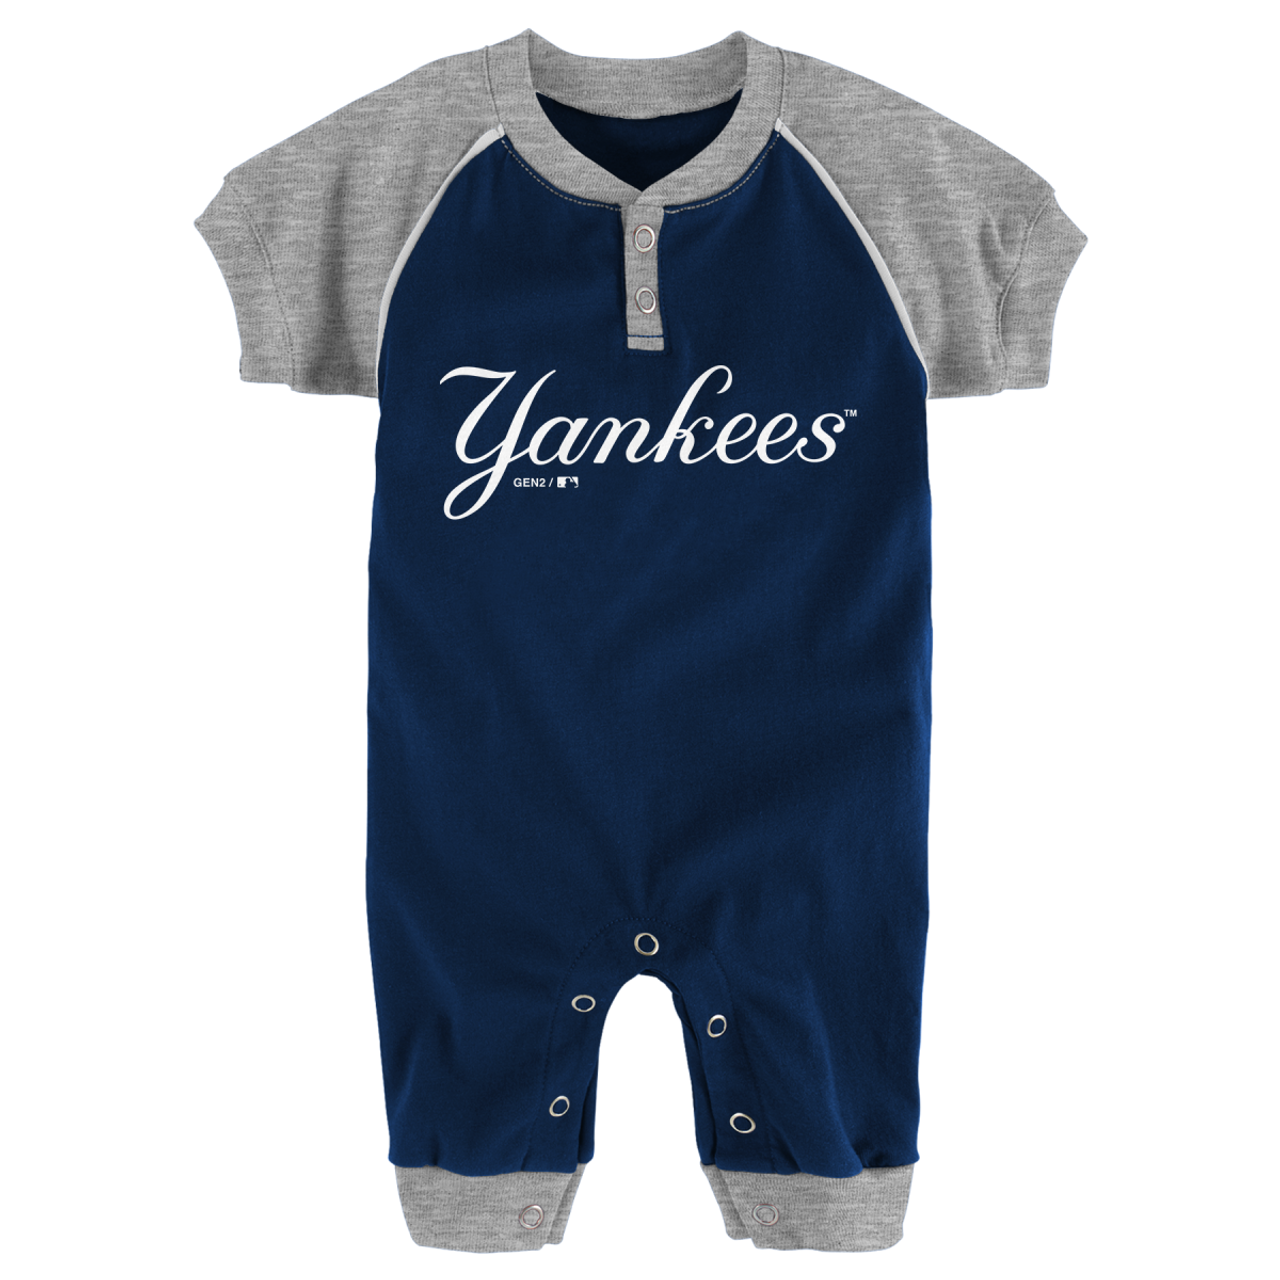 newborn yankees outfit